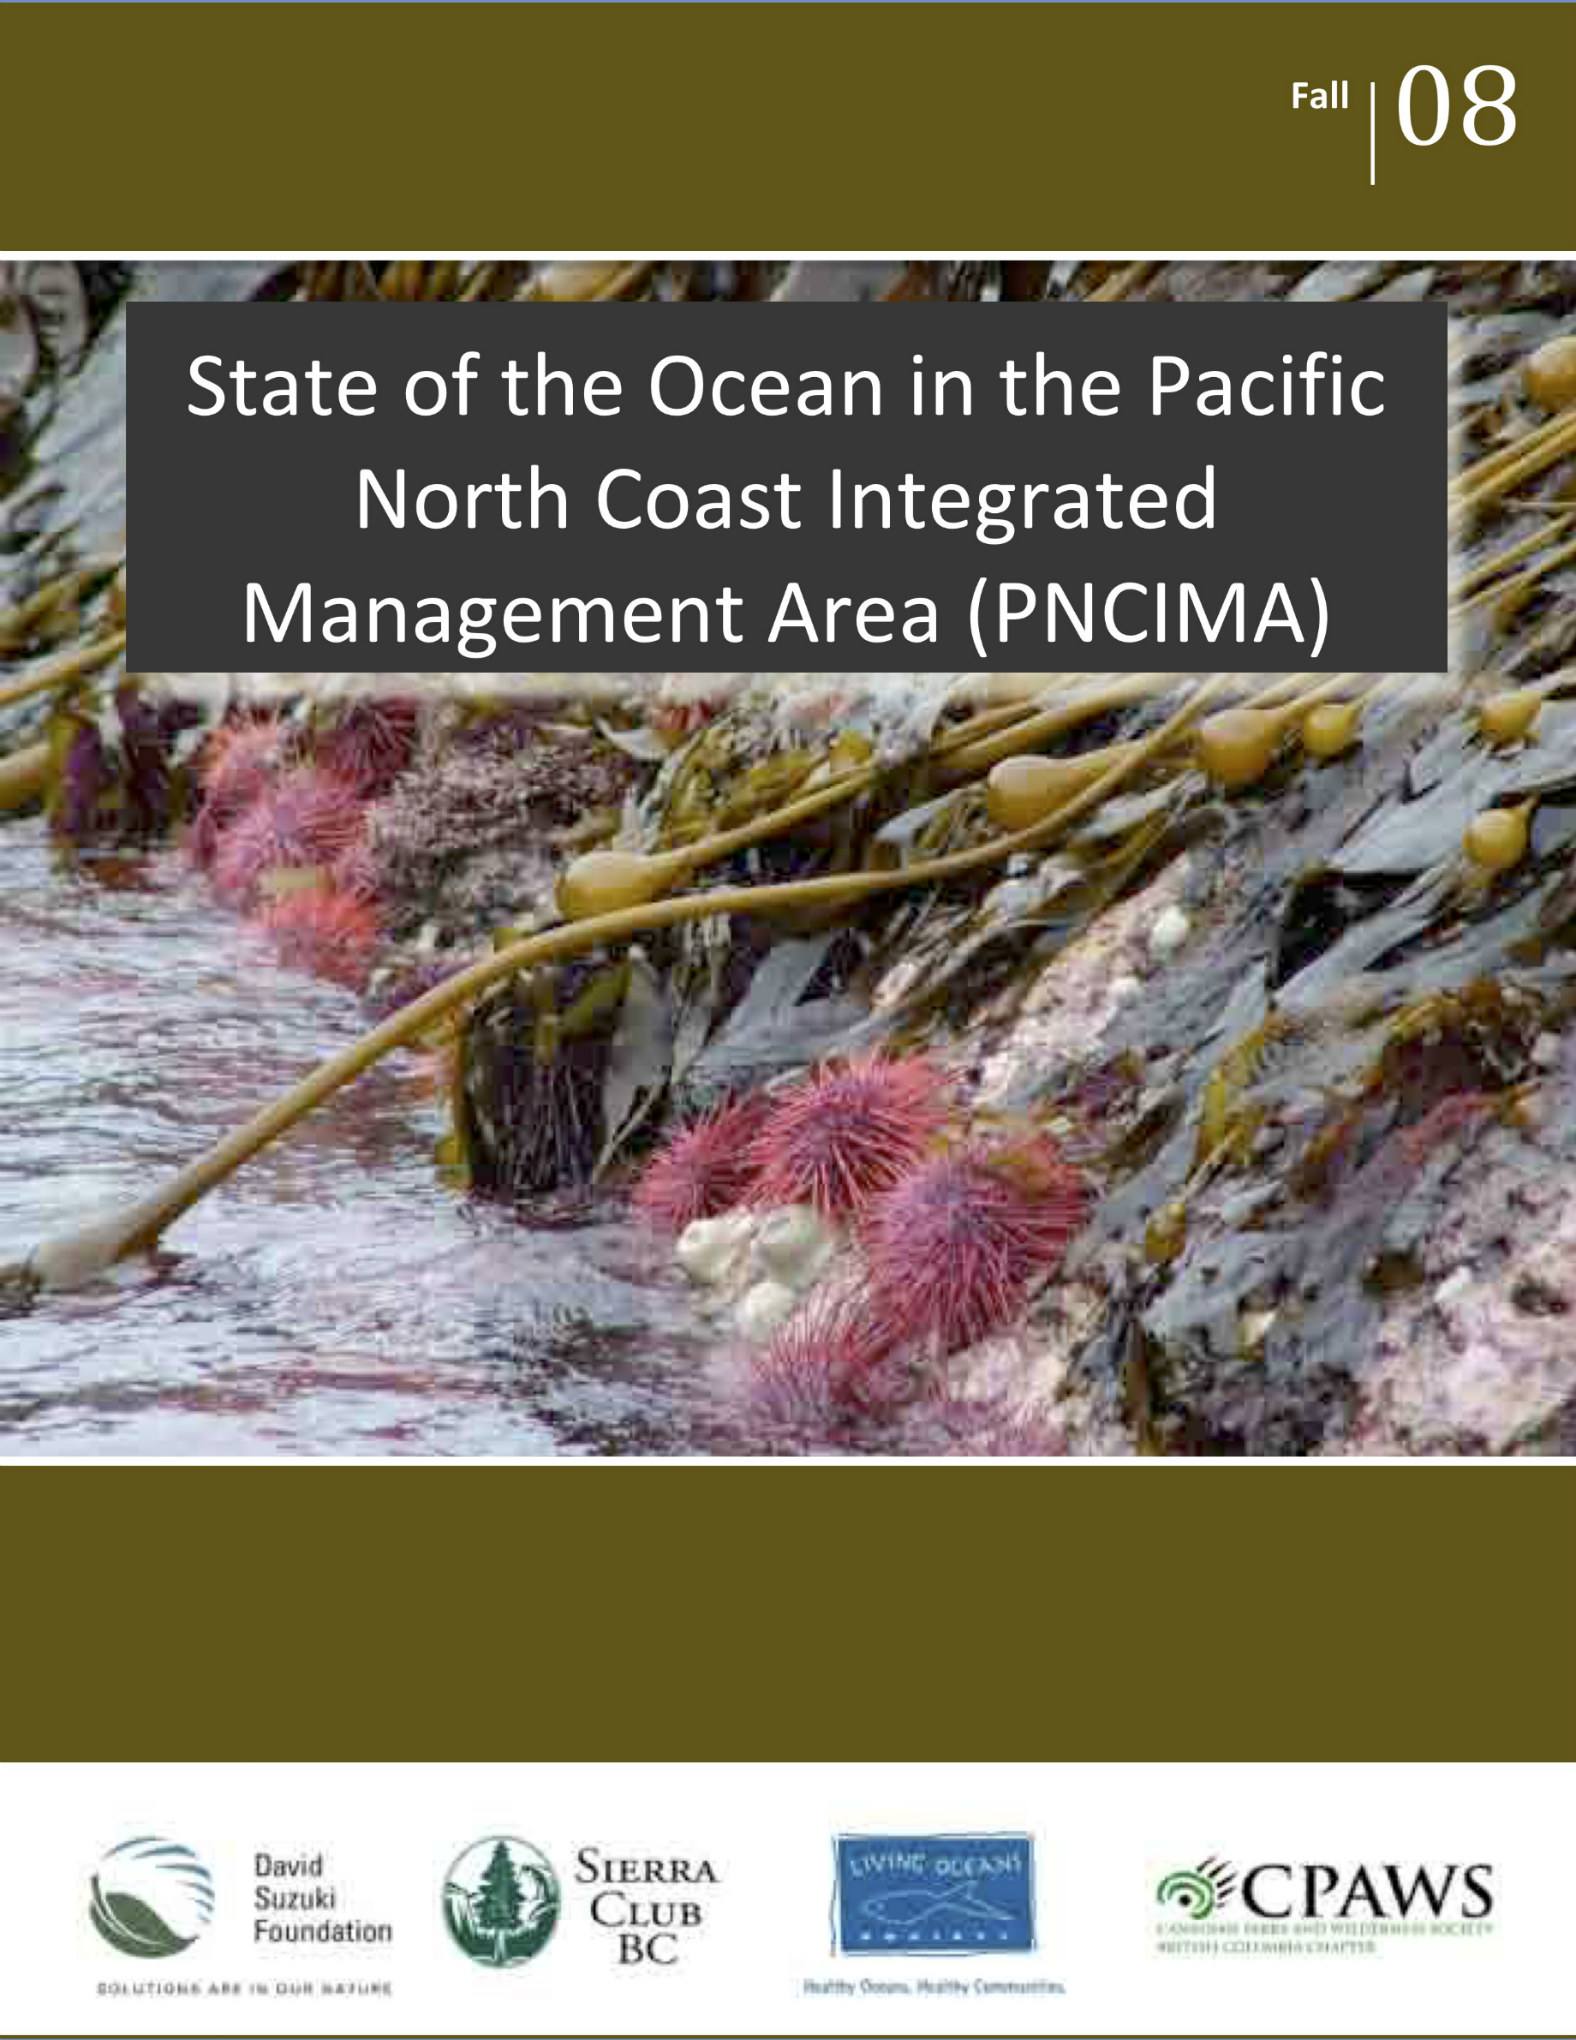 State of the Ocean in the Pacific North Coast Integrated Management Area (PNCIMA)